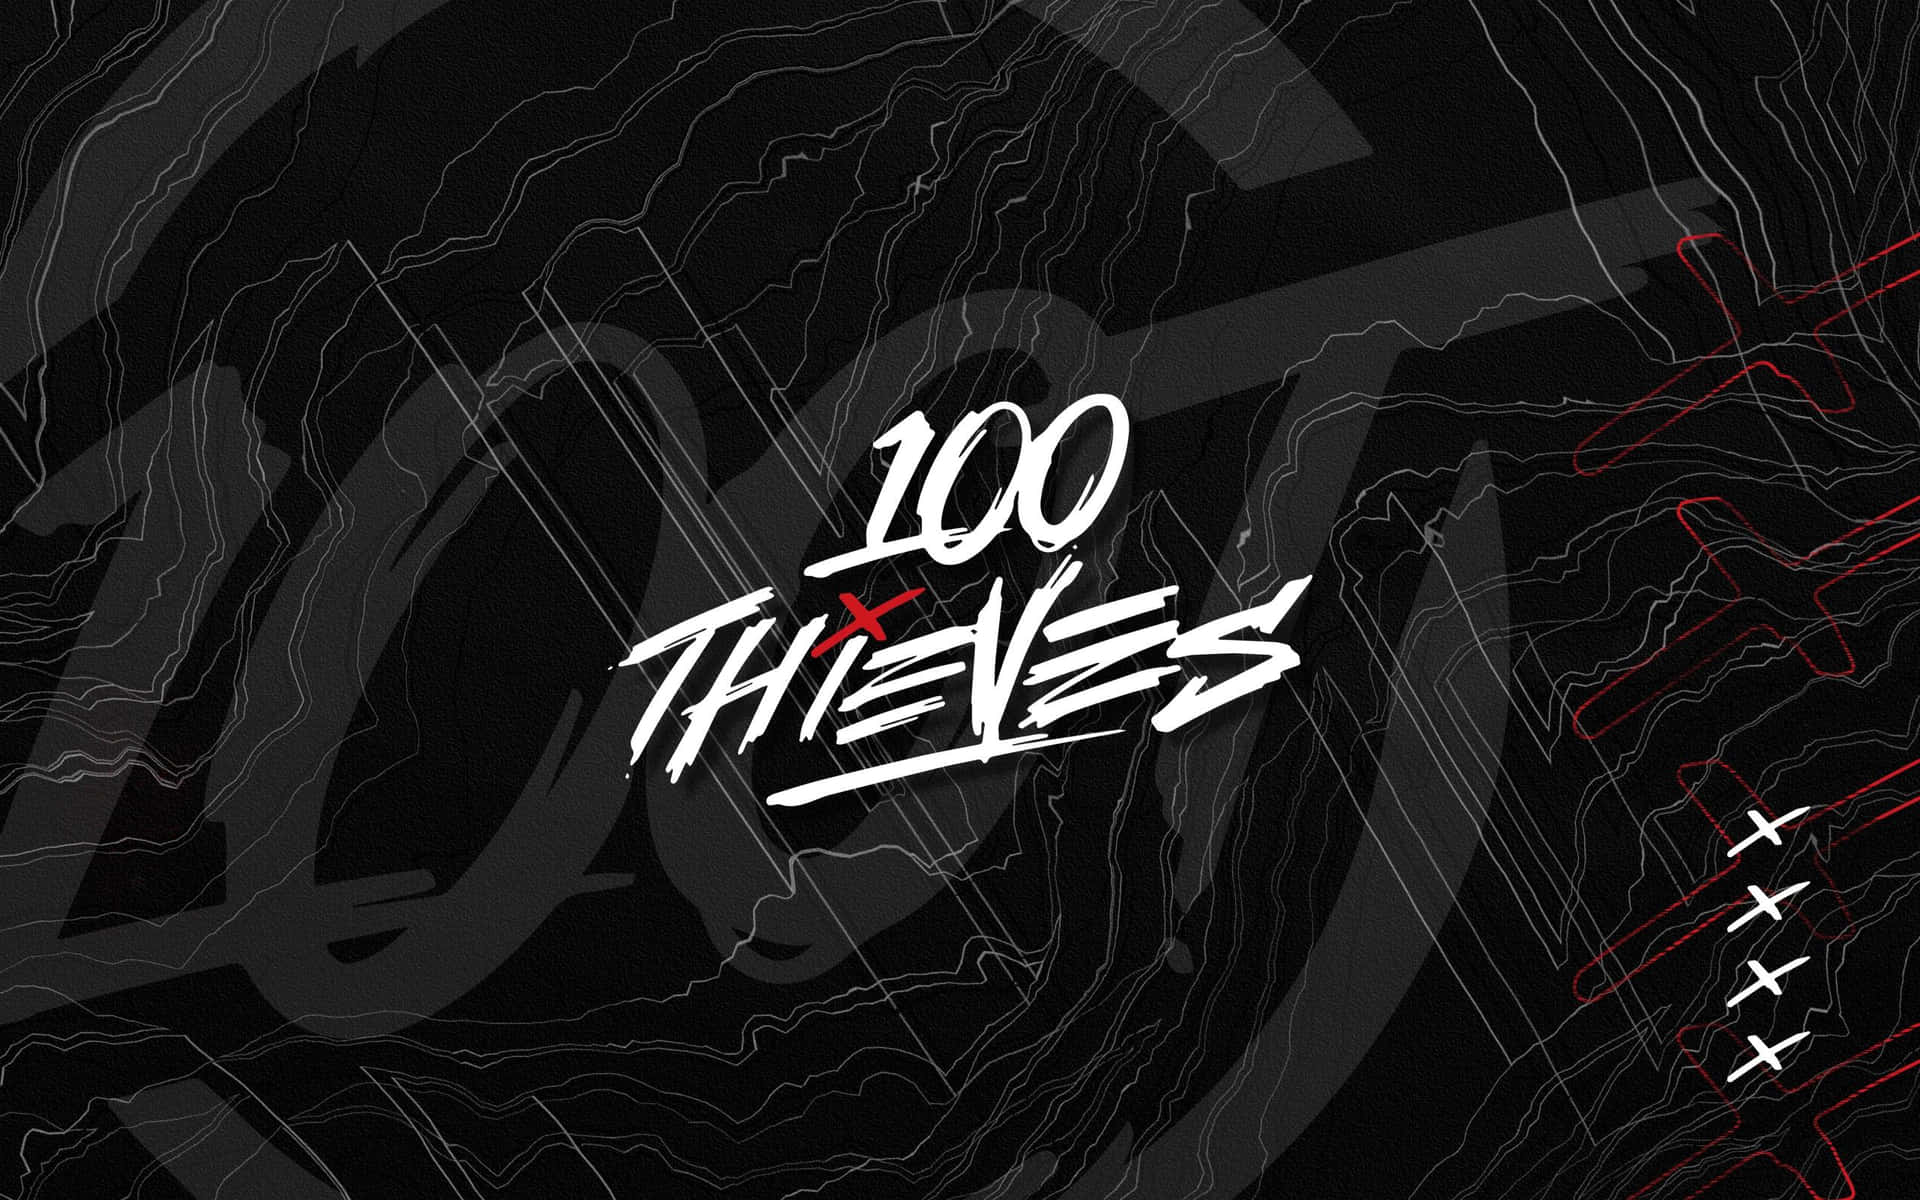 Representerar100 Thieves: H1ghr Music. (note: No Direct Translation For 